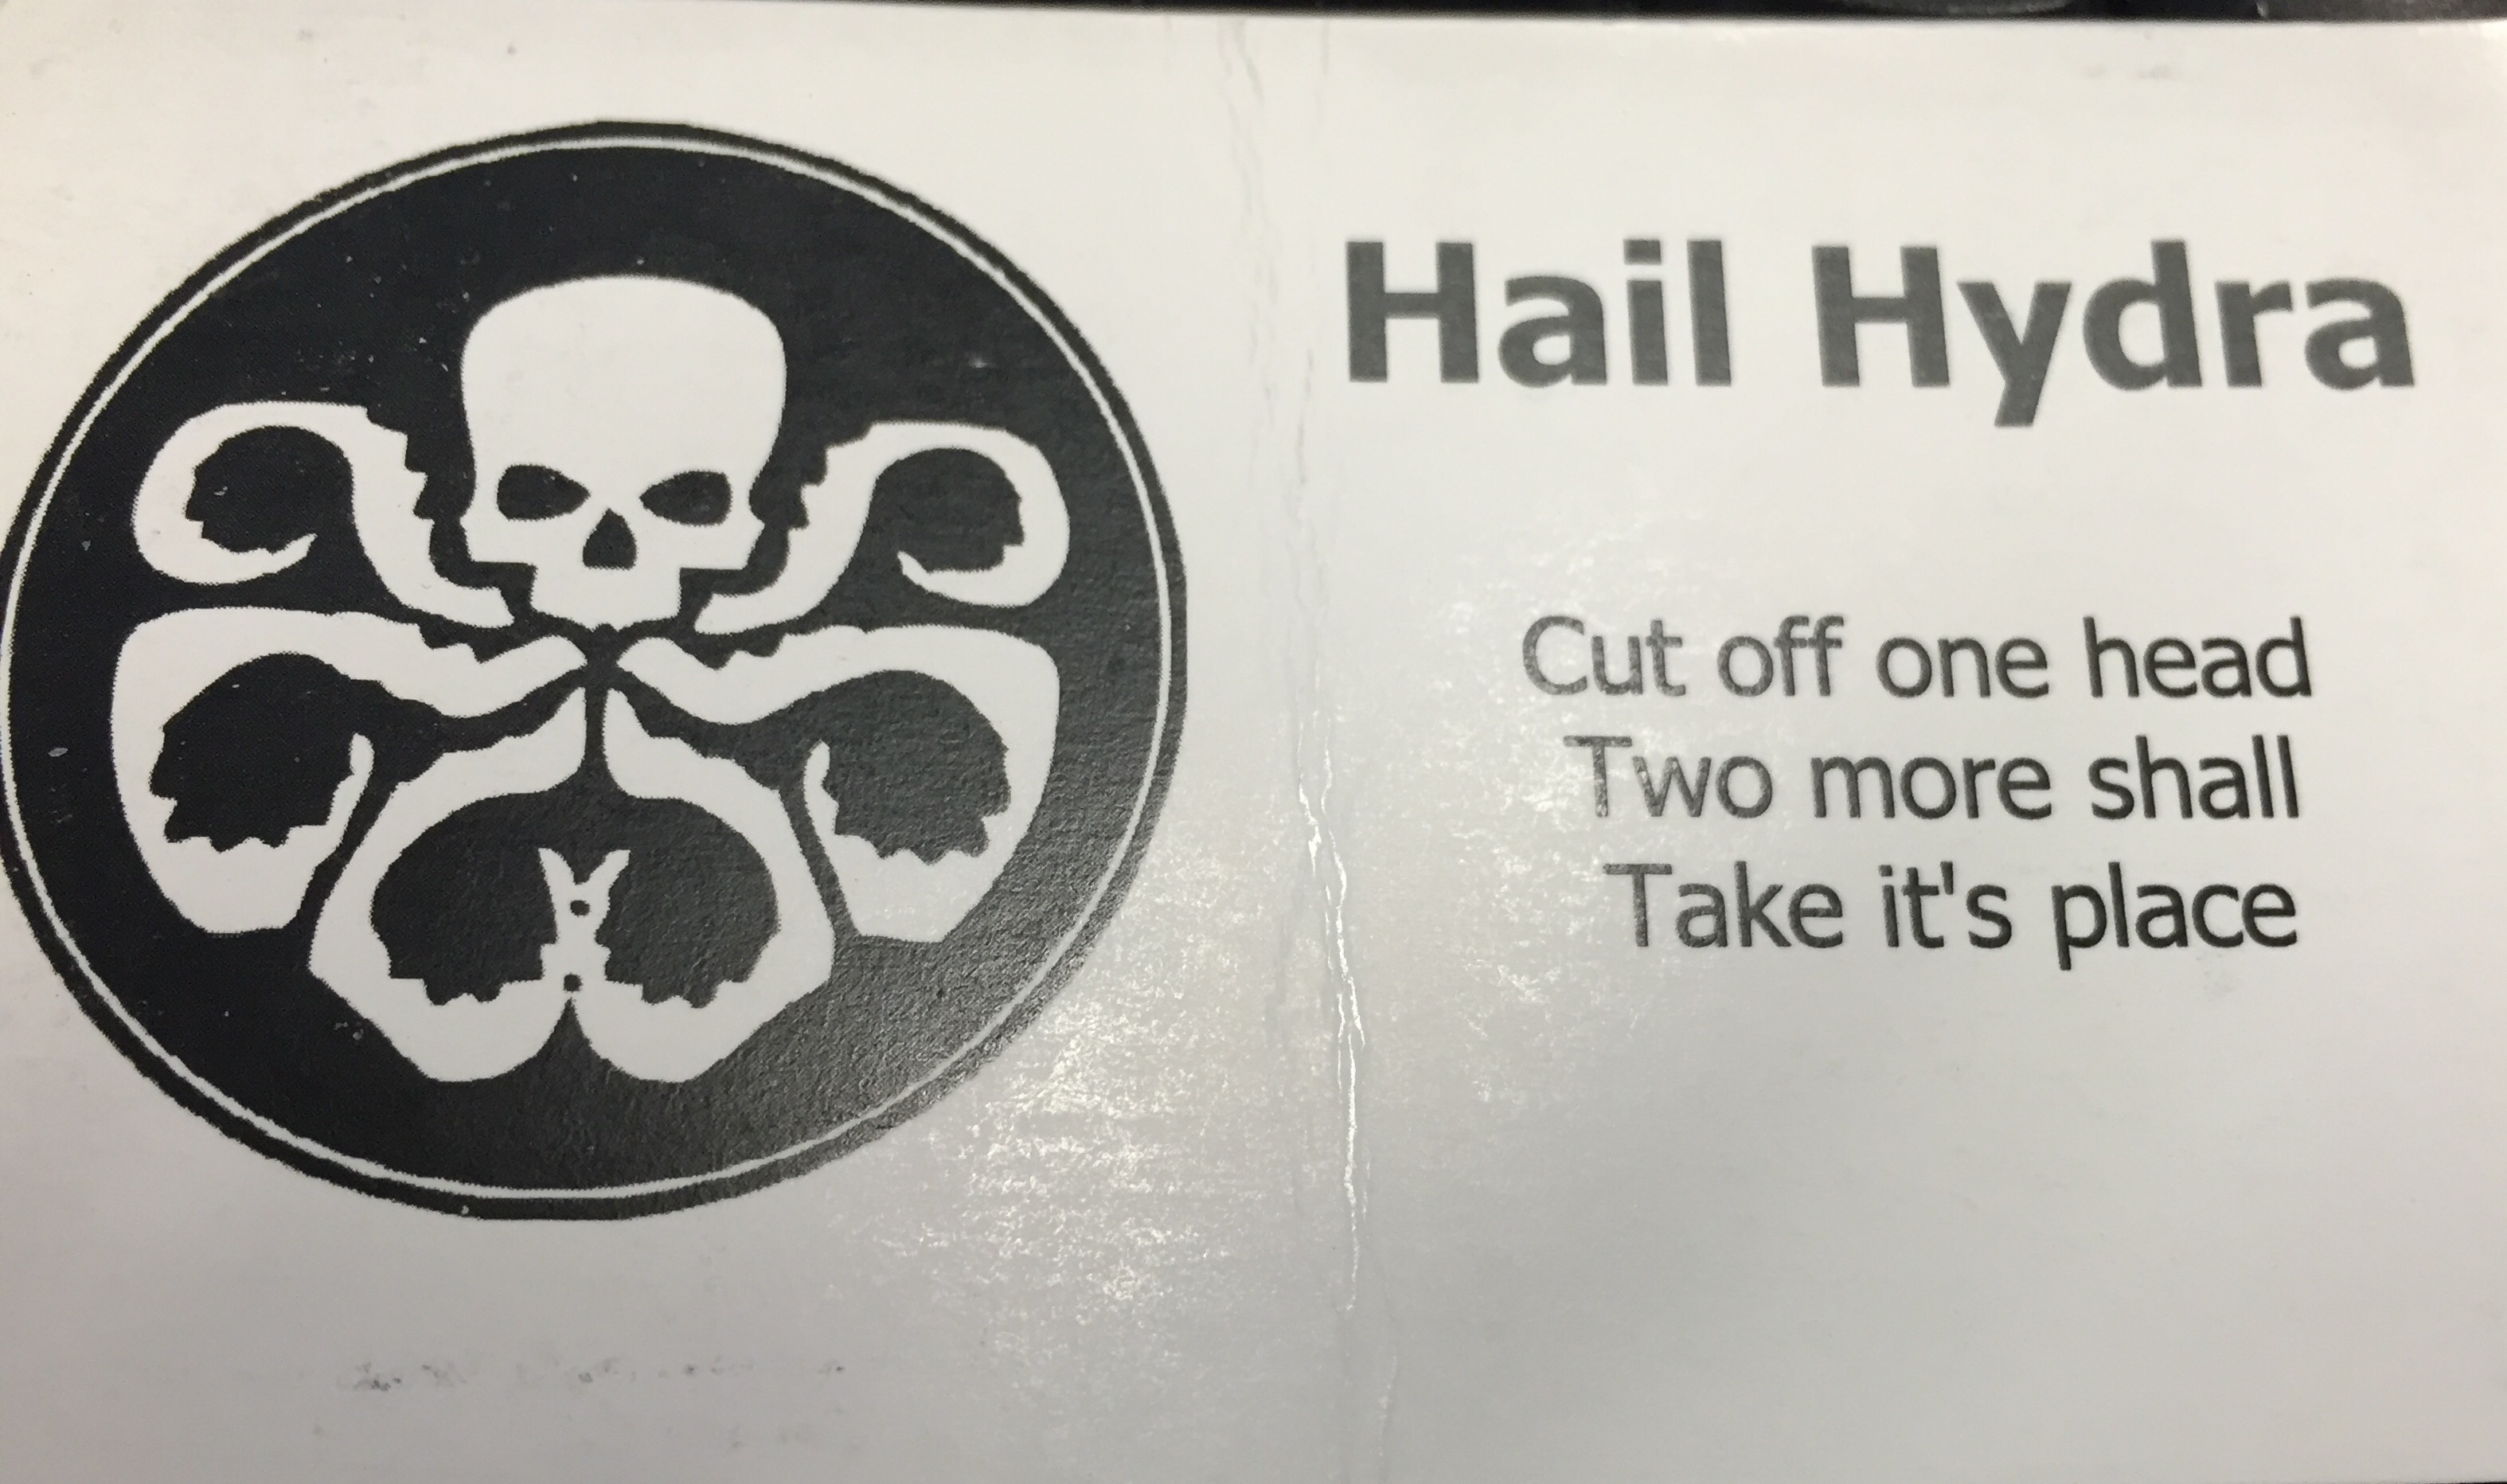 Hail Hydra Cut off one head Two more shall Take it's place